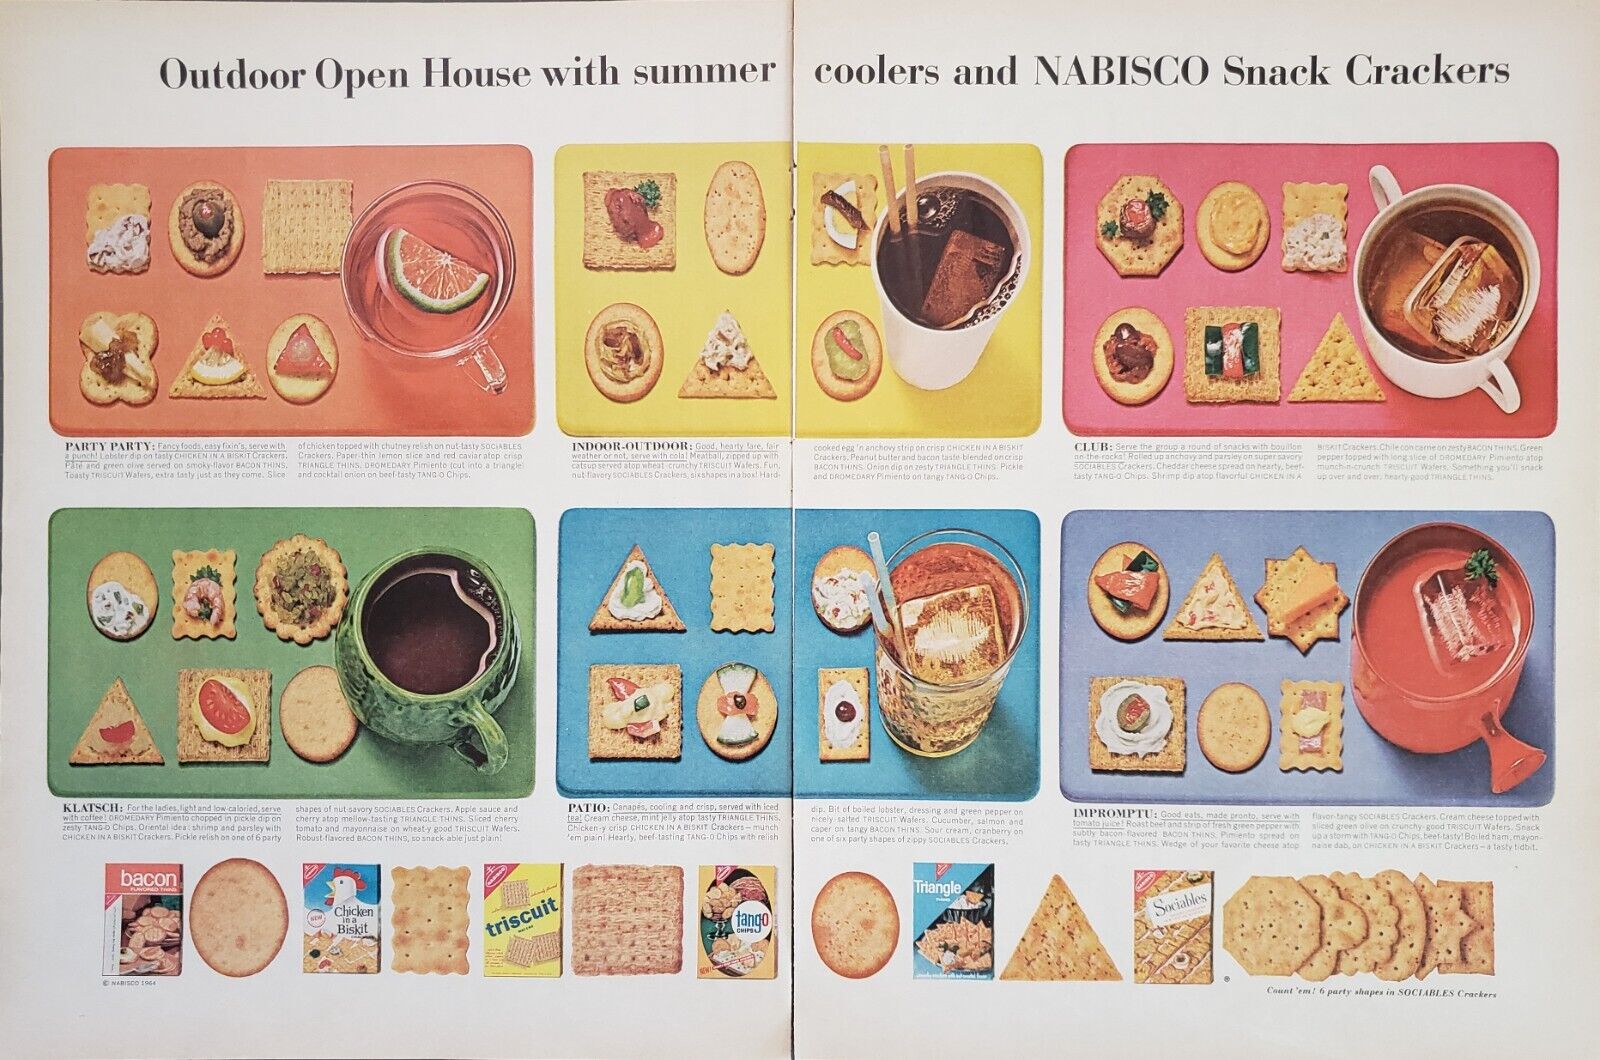 1964 Nabisco Snack Crackers Outdoor Open House With Summer 2 Page Print Ad